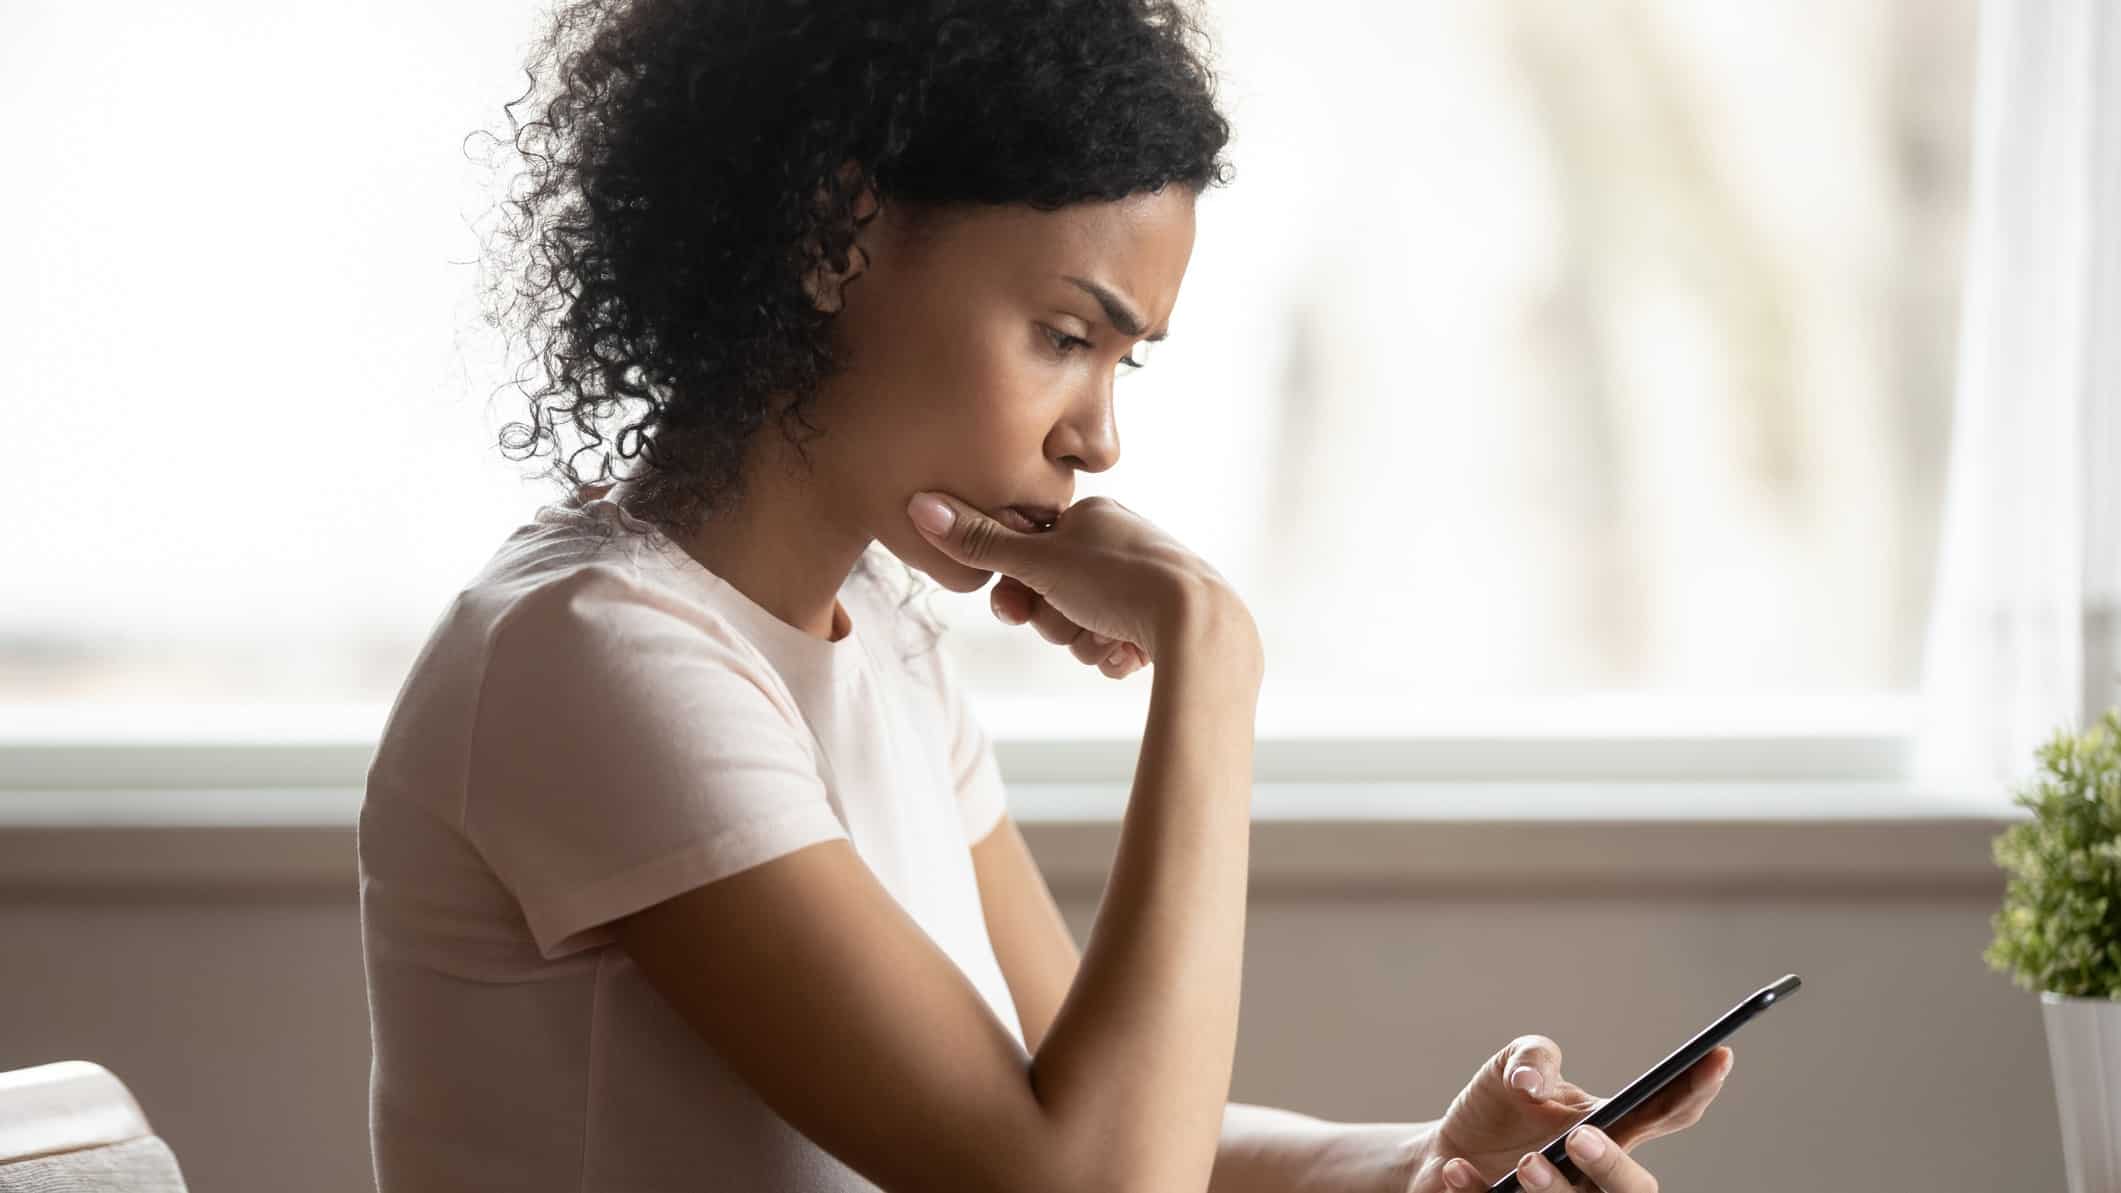 a woman looks down at her phone with a look of concern on her face and her hand held to her chin while she seriously digests the news she is receiving.